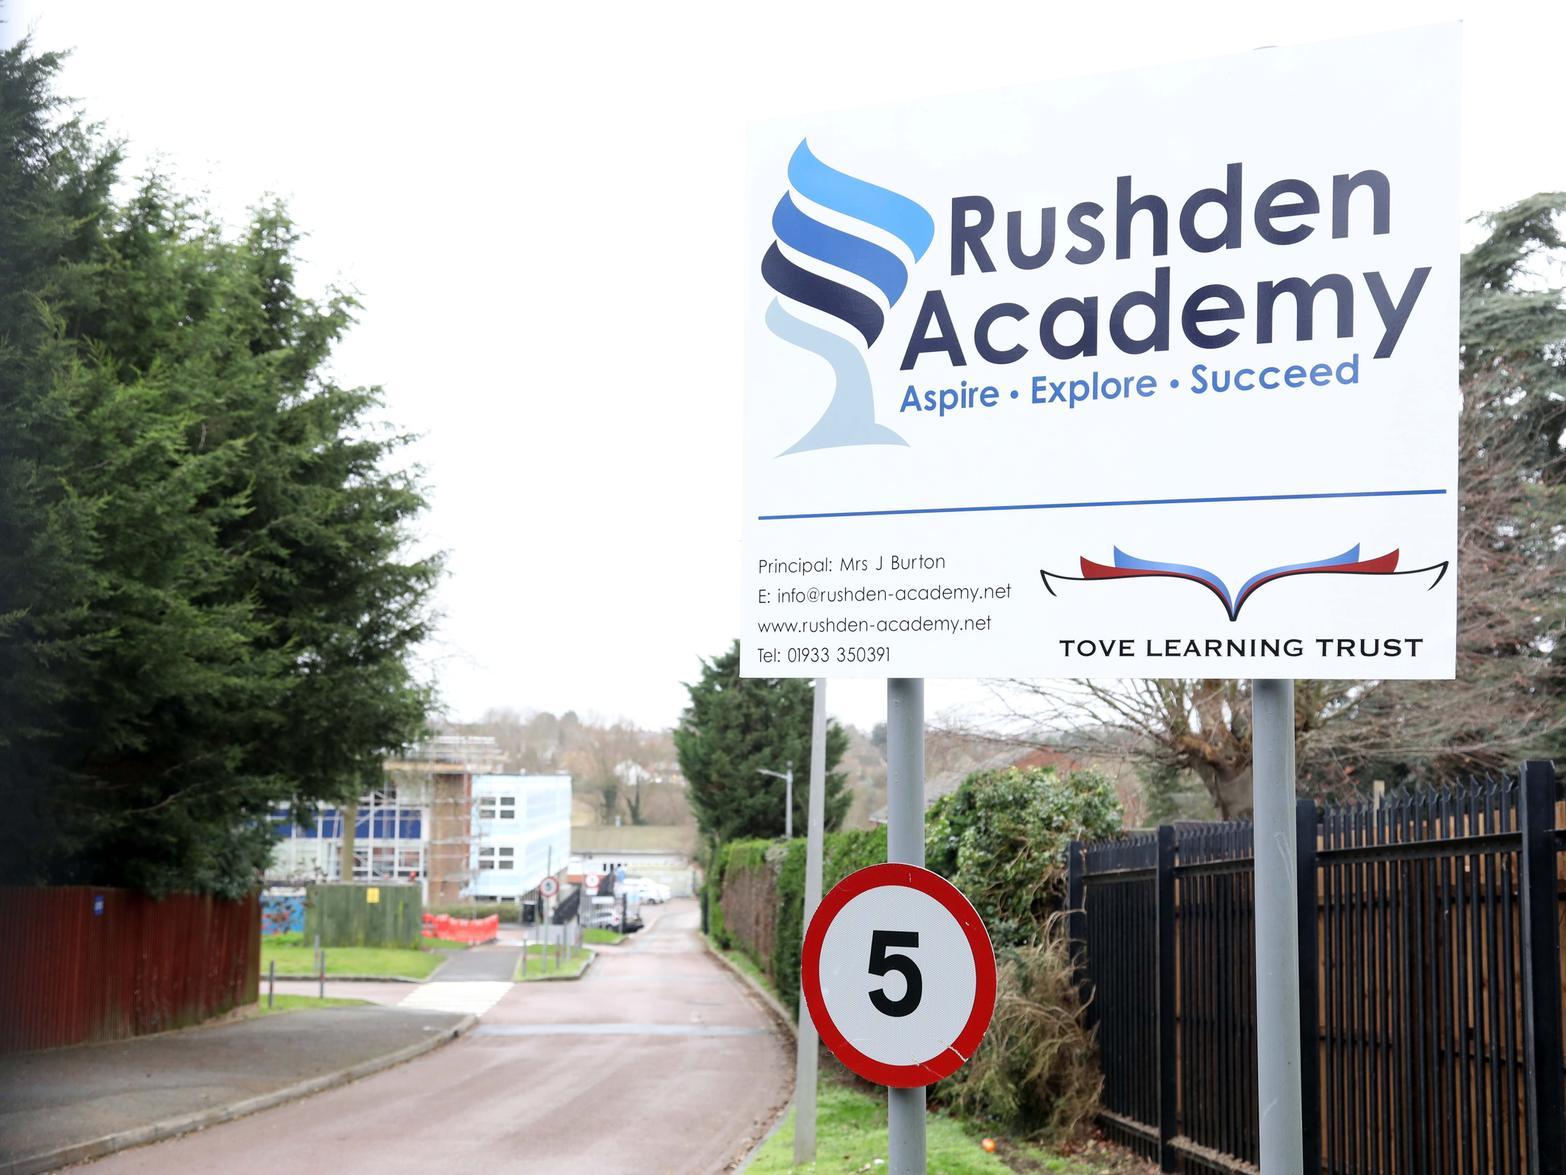 Rushden Academy's branded uniform only includes a tie and a checked skirt for girls, the blazer is just black and the school lists approved school-wear from Tesco and Asda in its uniform guide. The PE kit list is more extensive, with school logo t-shirt and short for girls and boys. Girls also need the school's sports leggings and boys need the school's rugby shirt and football socks.